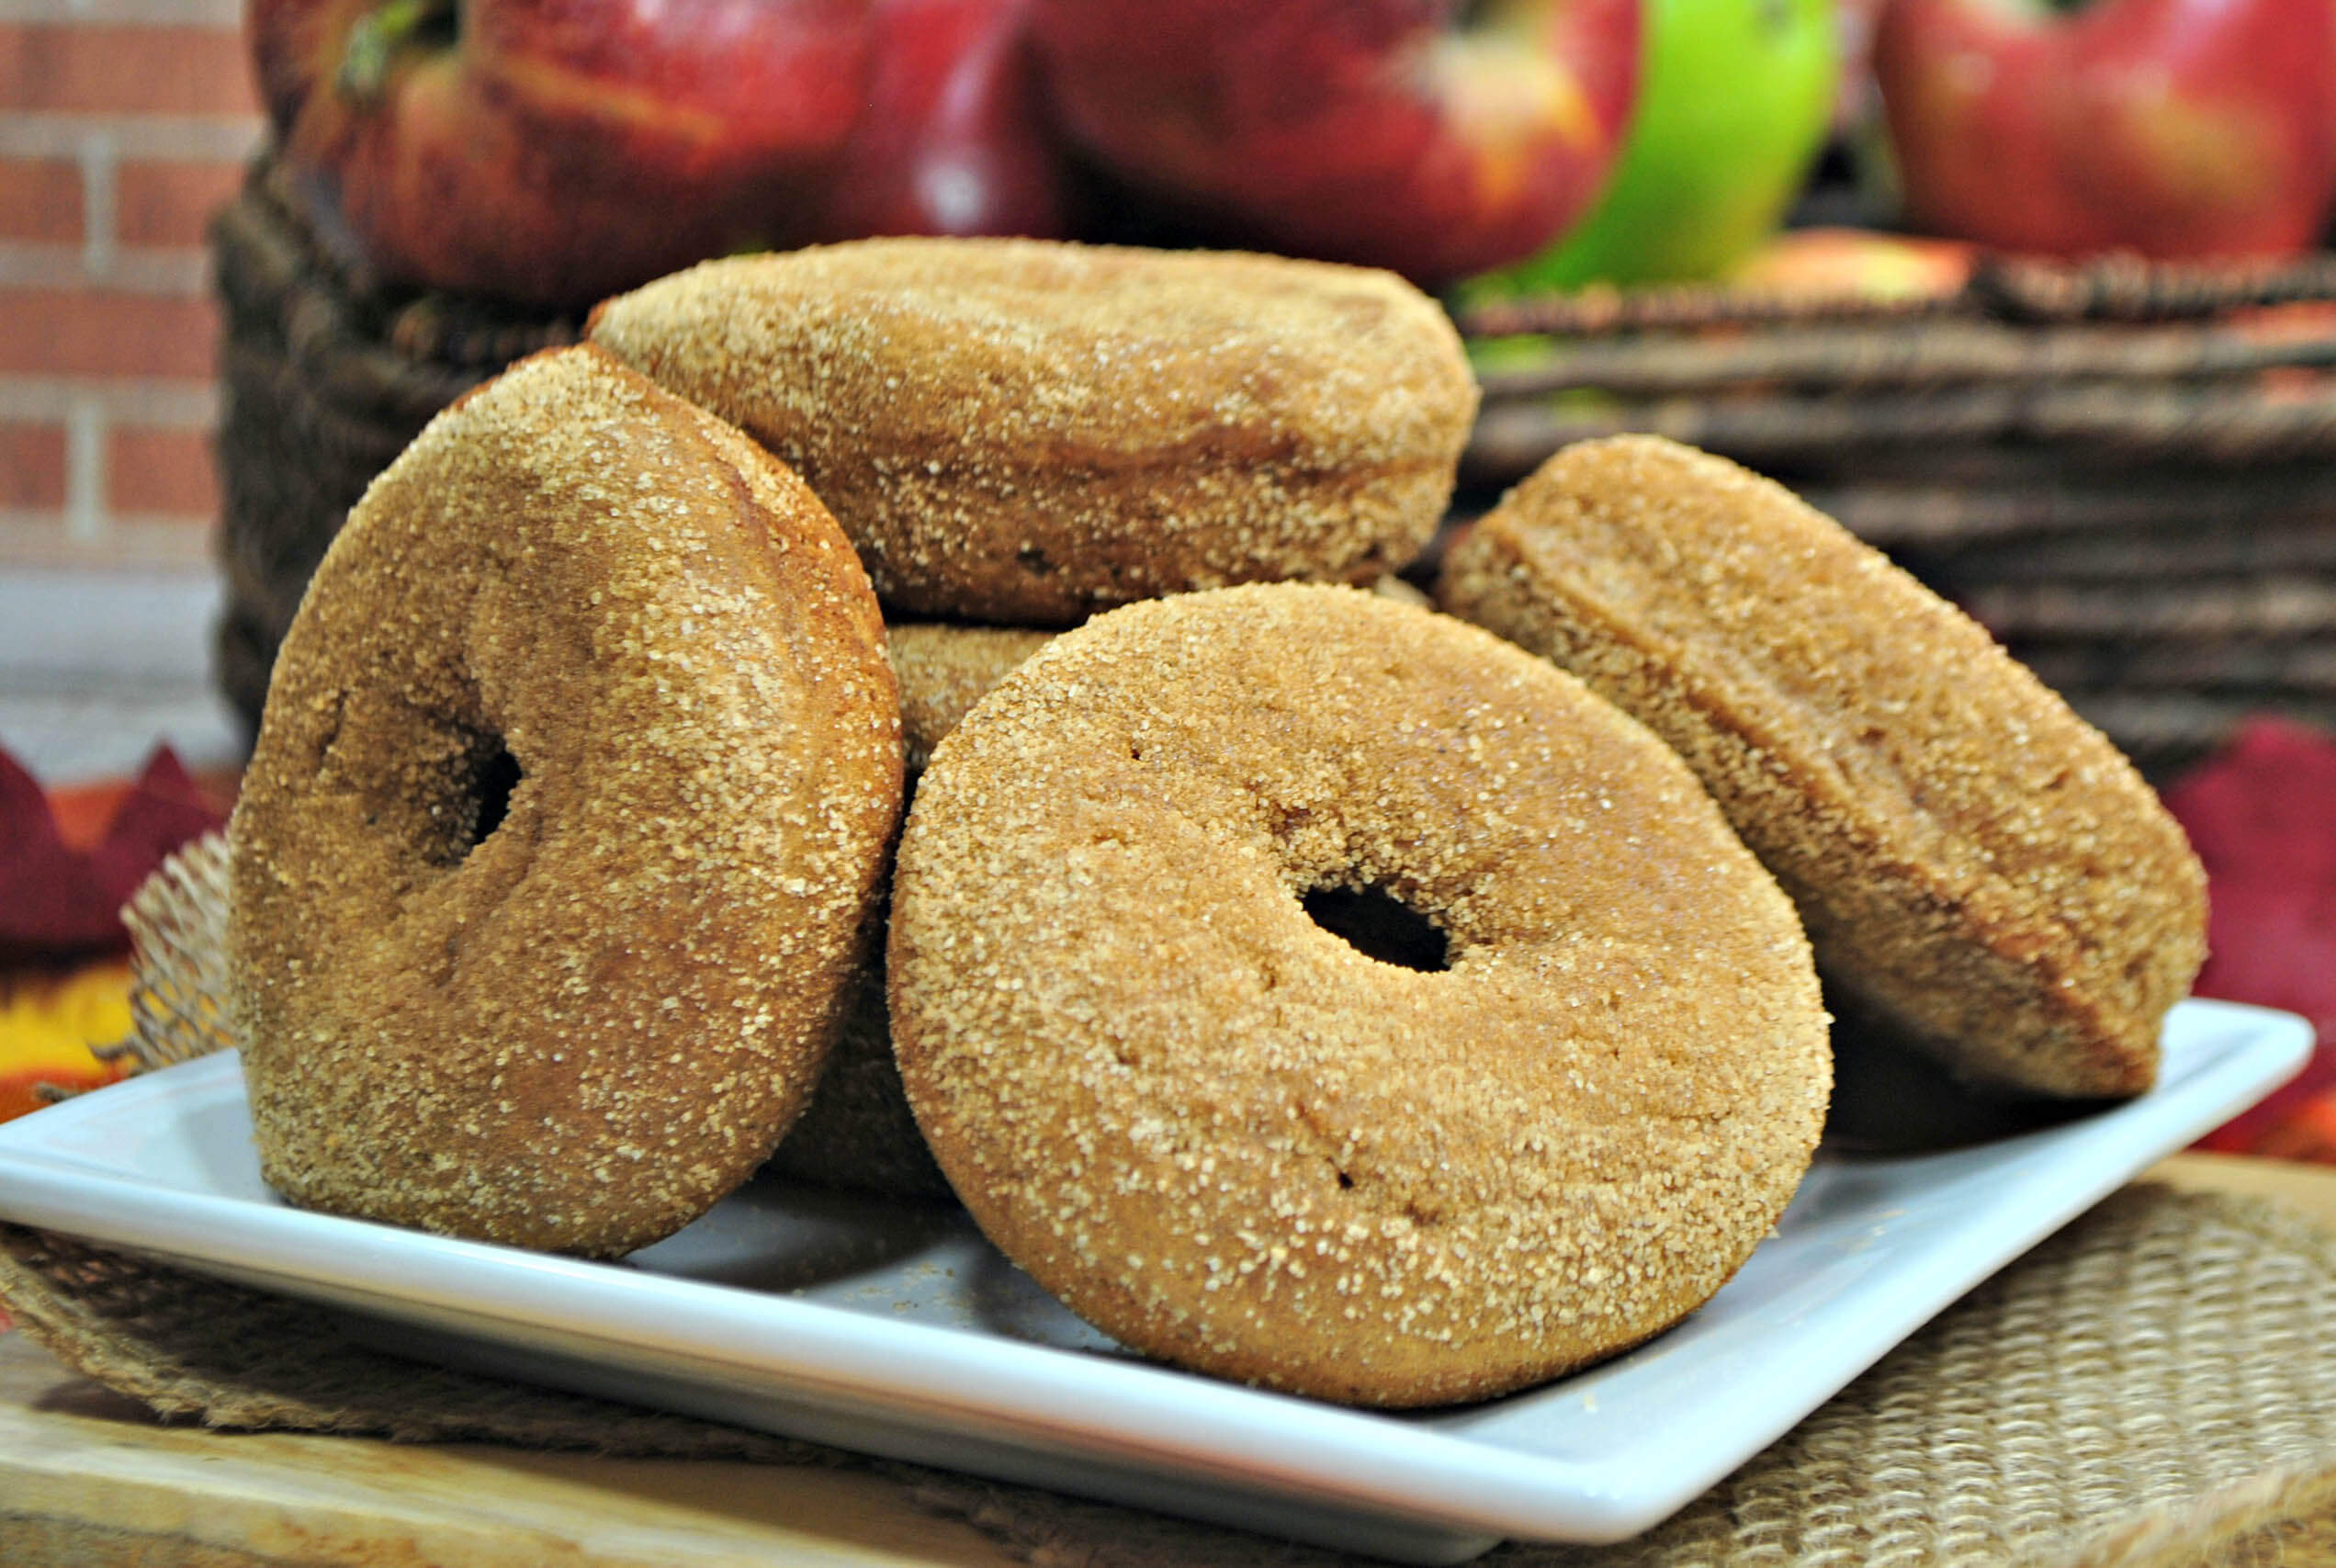 Apple Chocolate Chip Donuts